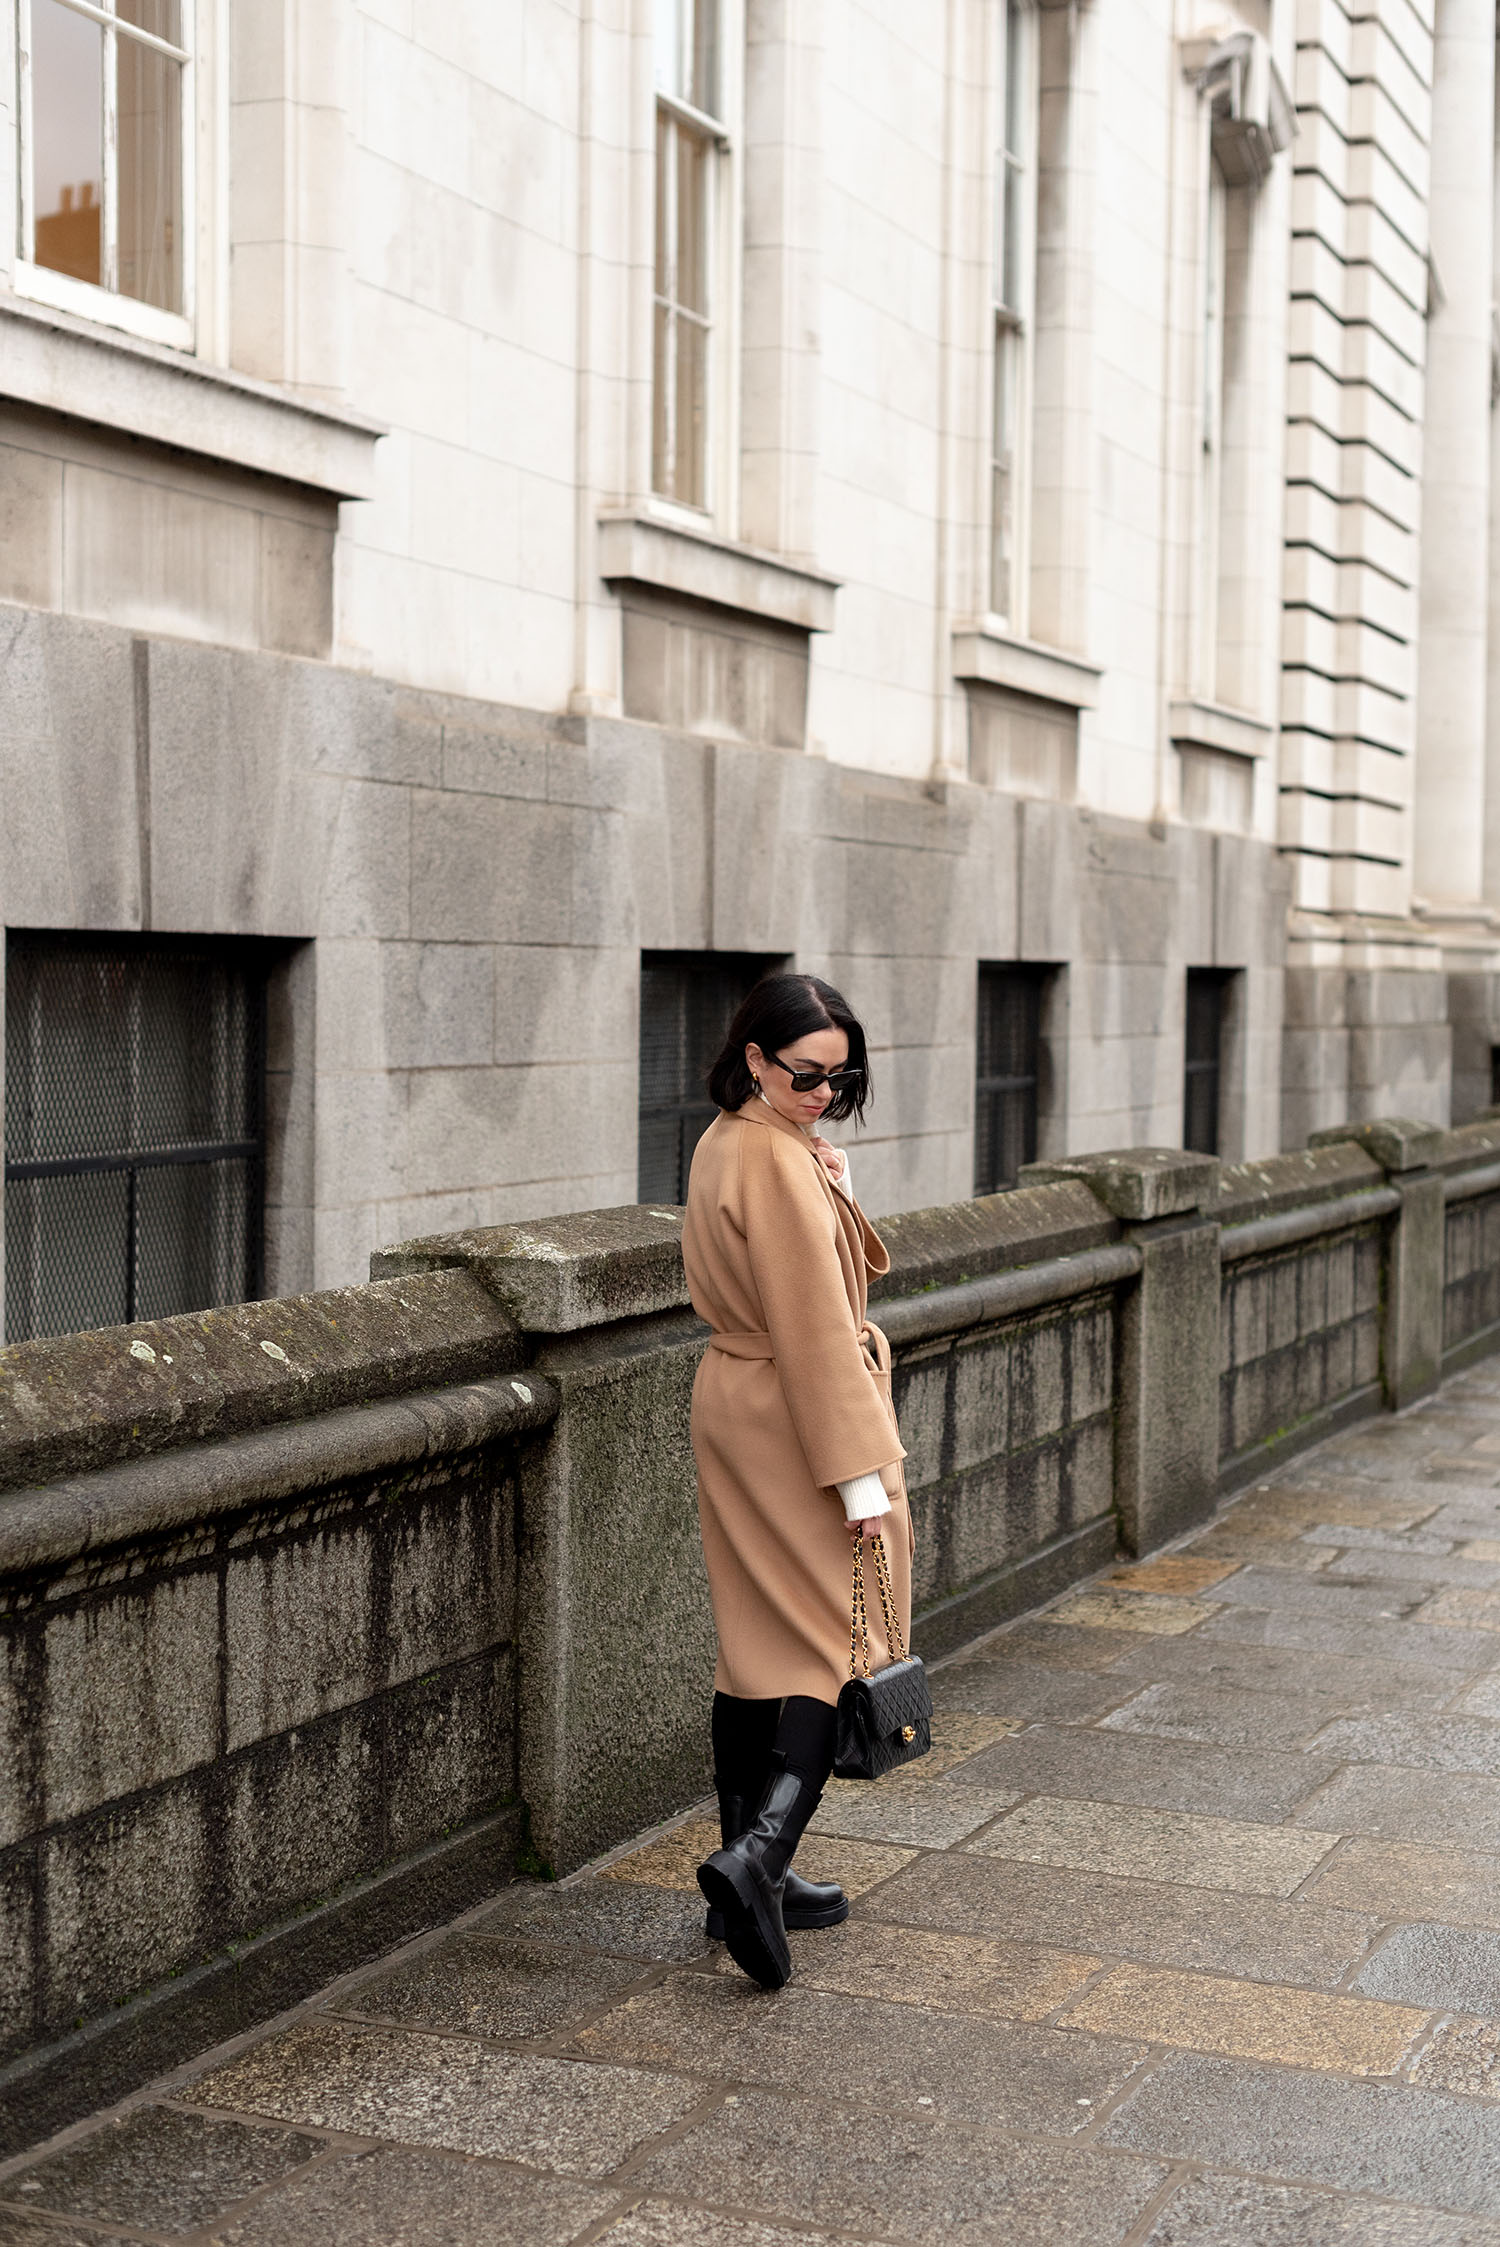 Coco & Vera - RayBan sunglasses, H&M boots, The Curated coat